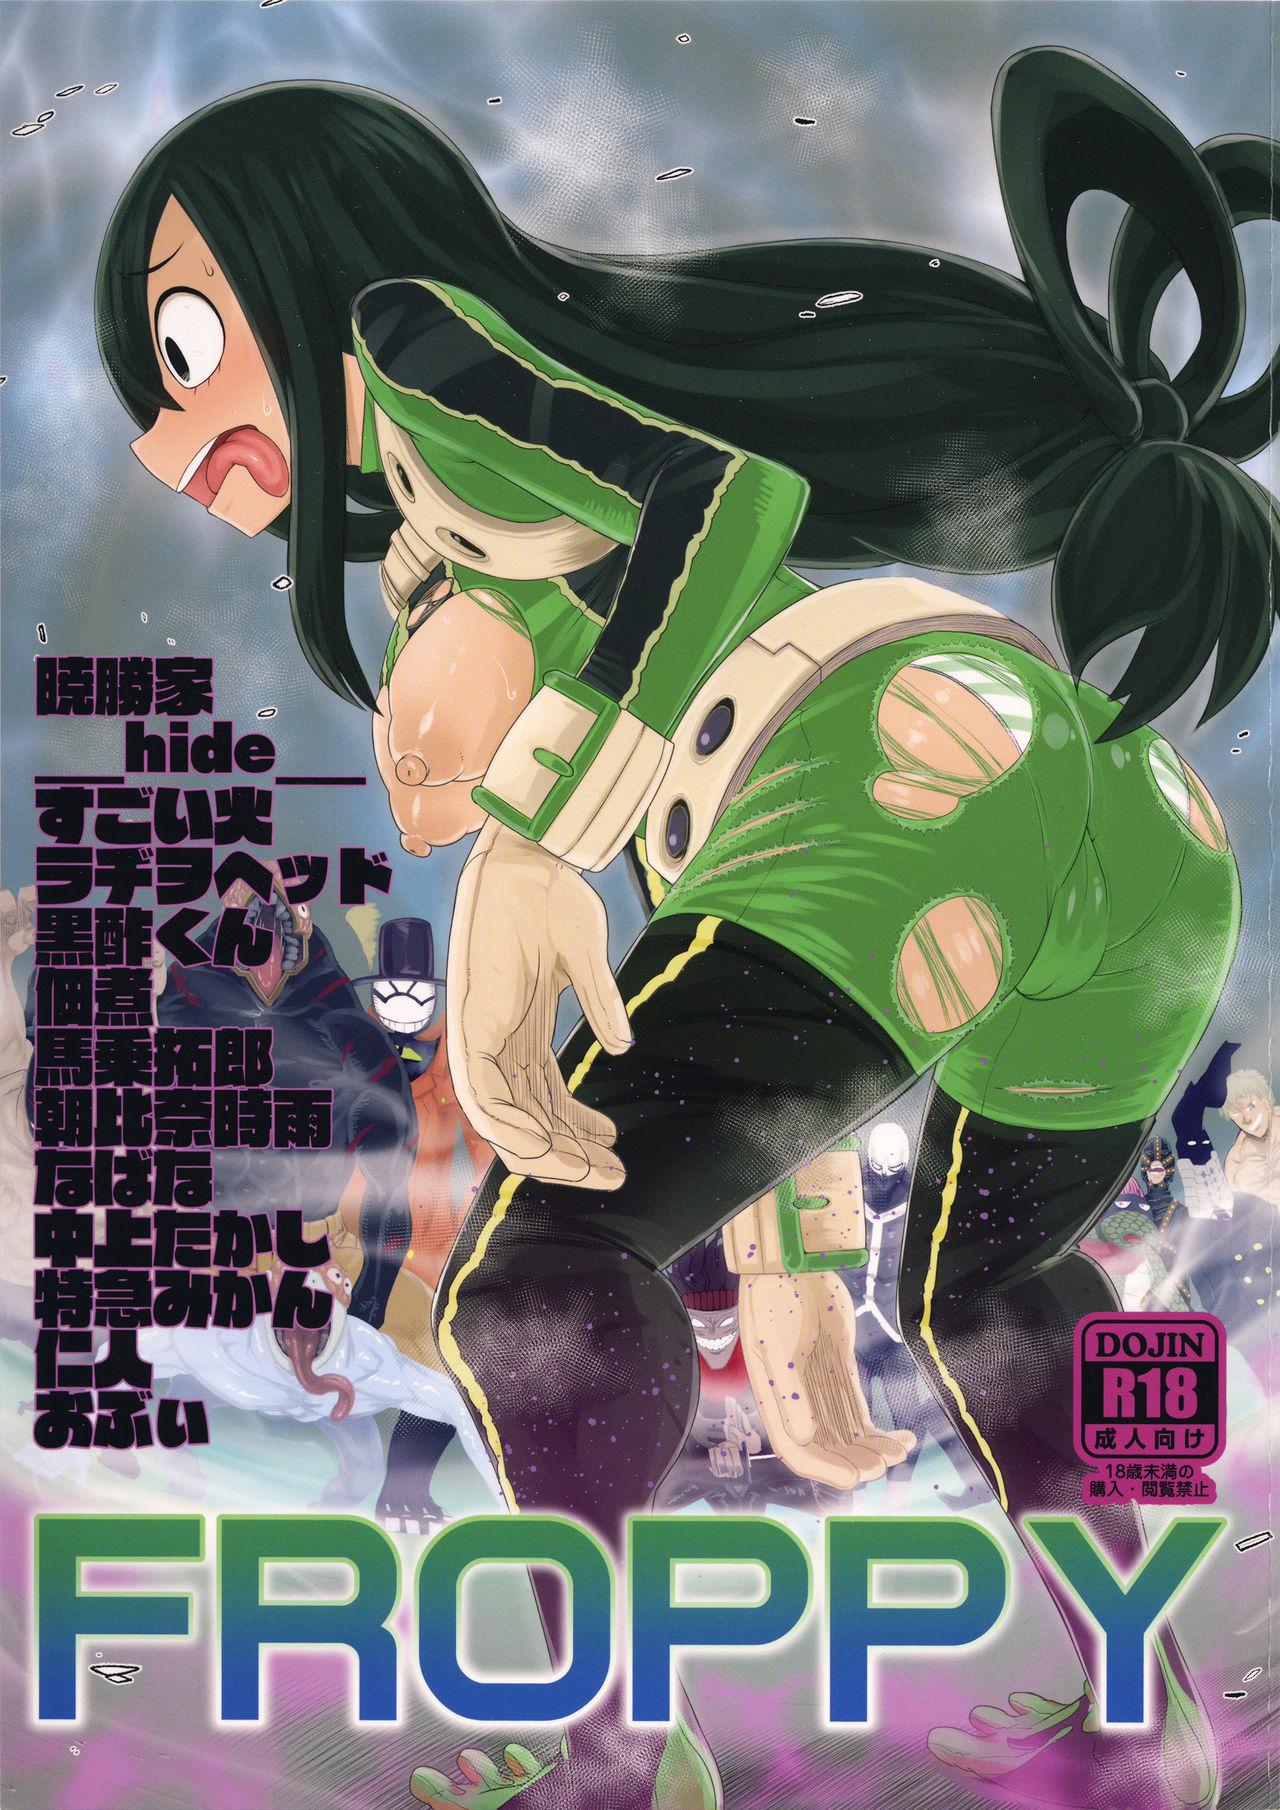 Penis FROPPY - My hero academia Girl On Girl - Picture 1